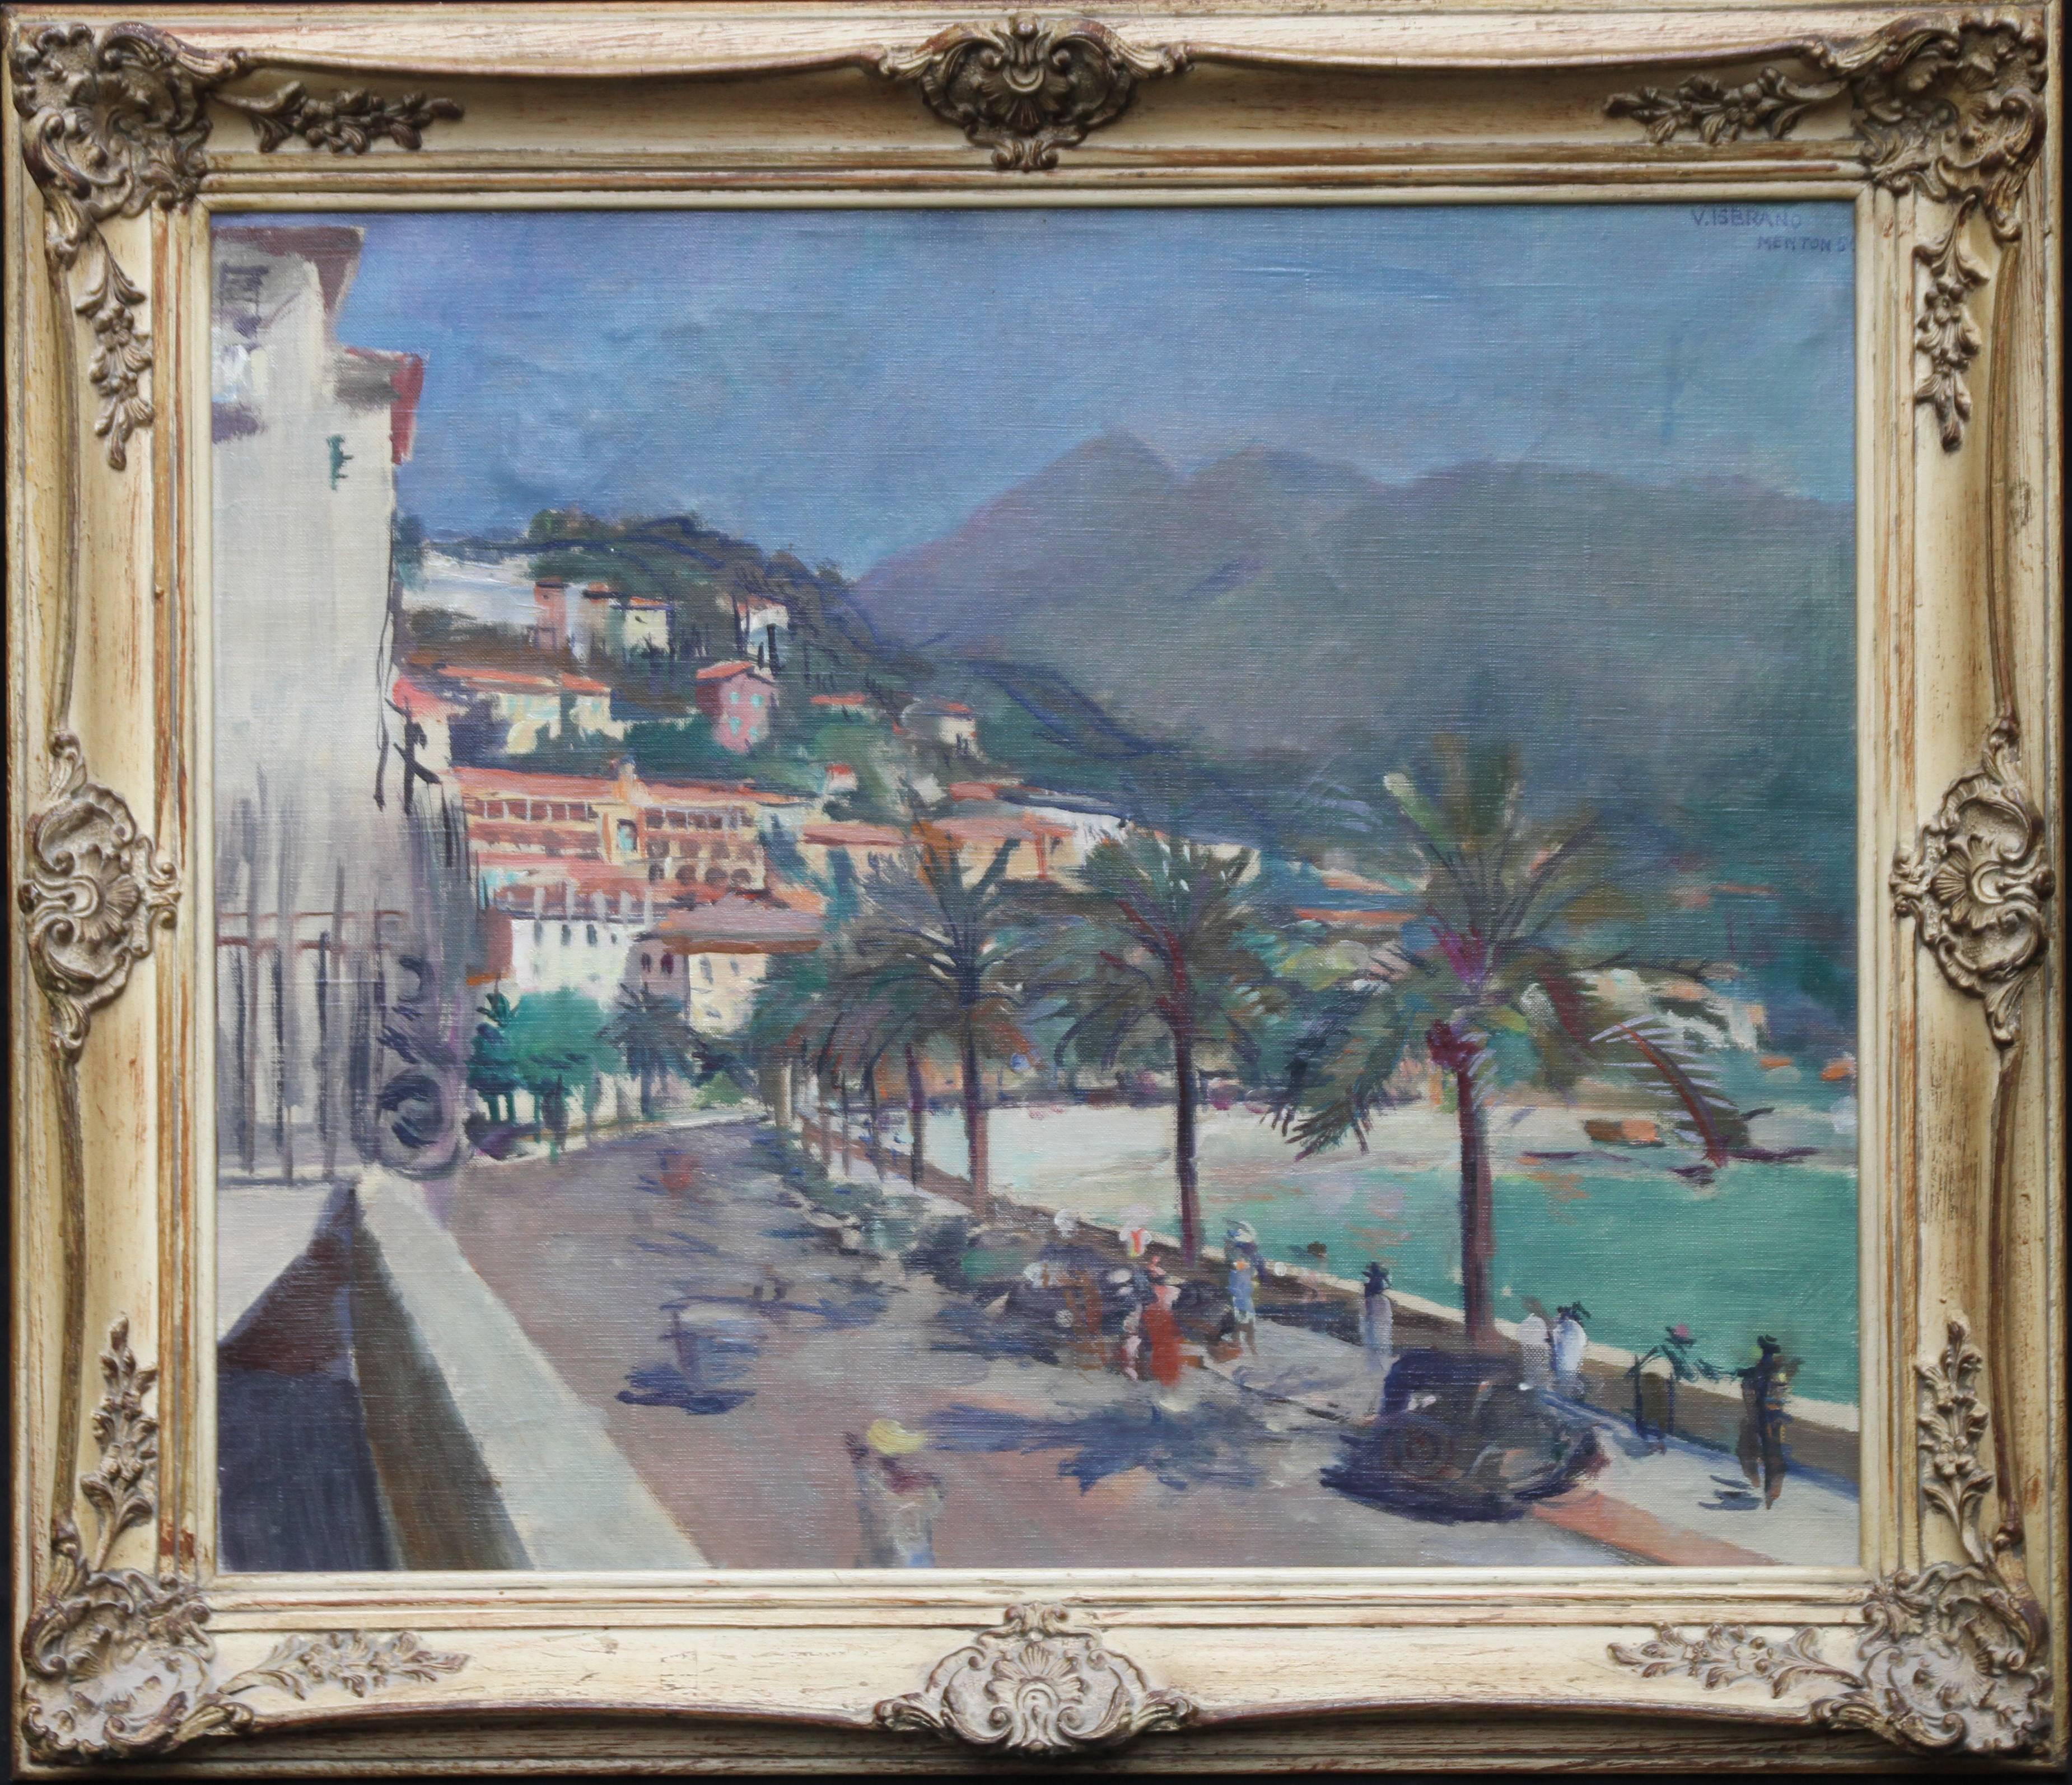 Victor Isbrand Landscape Painting - Menton South of France - British 40's Impressionist oil painting beach promenade